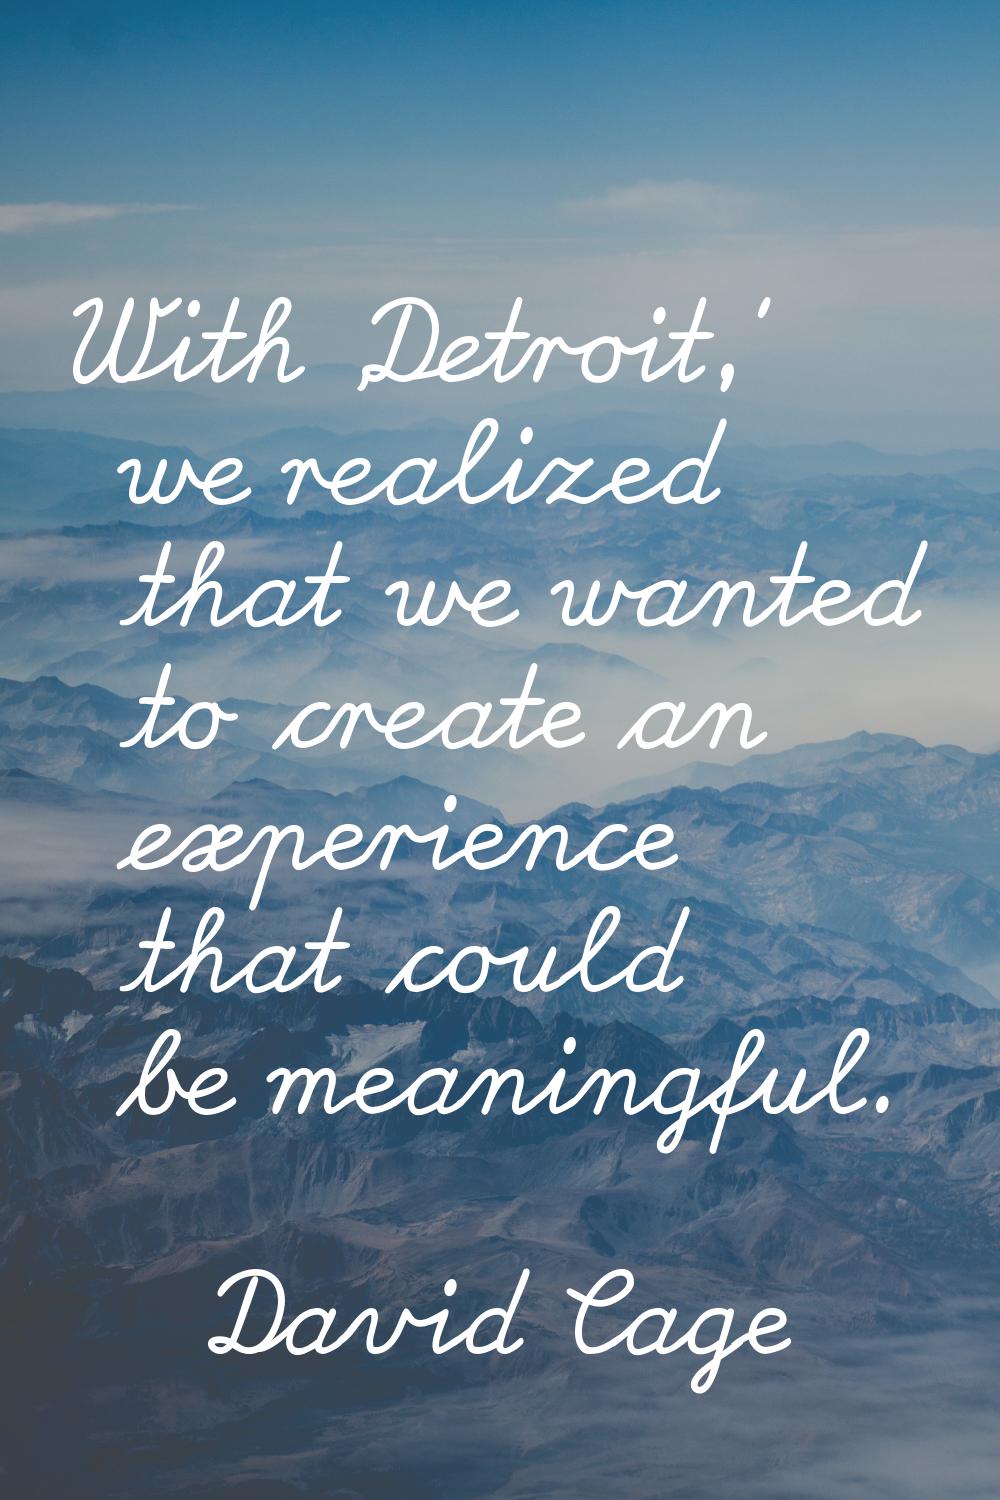 With 'Detroit,' we realized that we wanted to create an experience that could be meaningful.